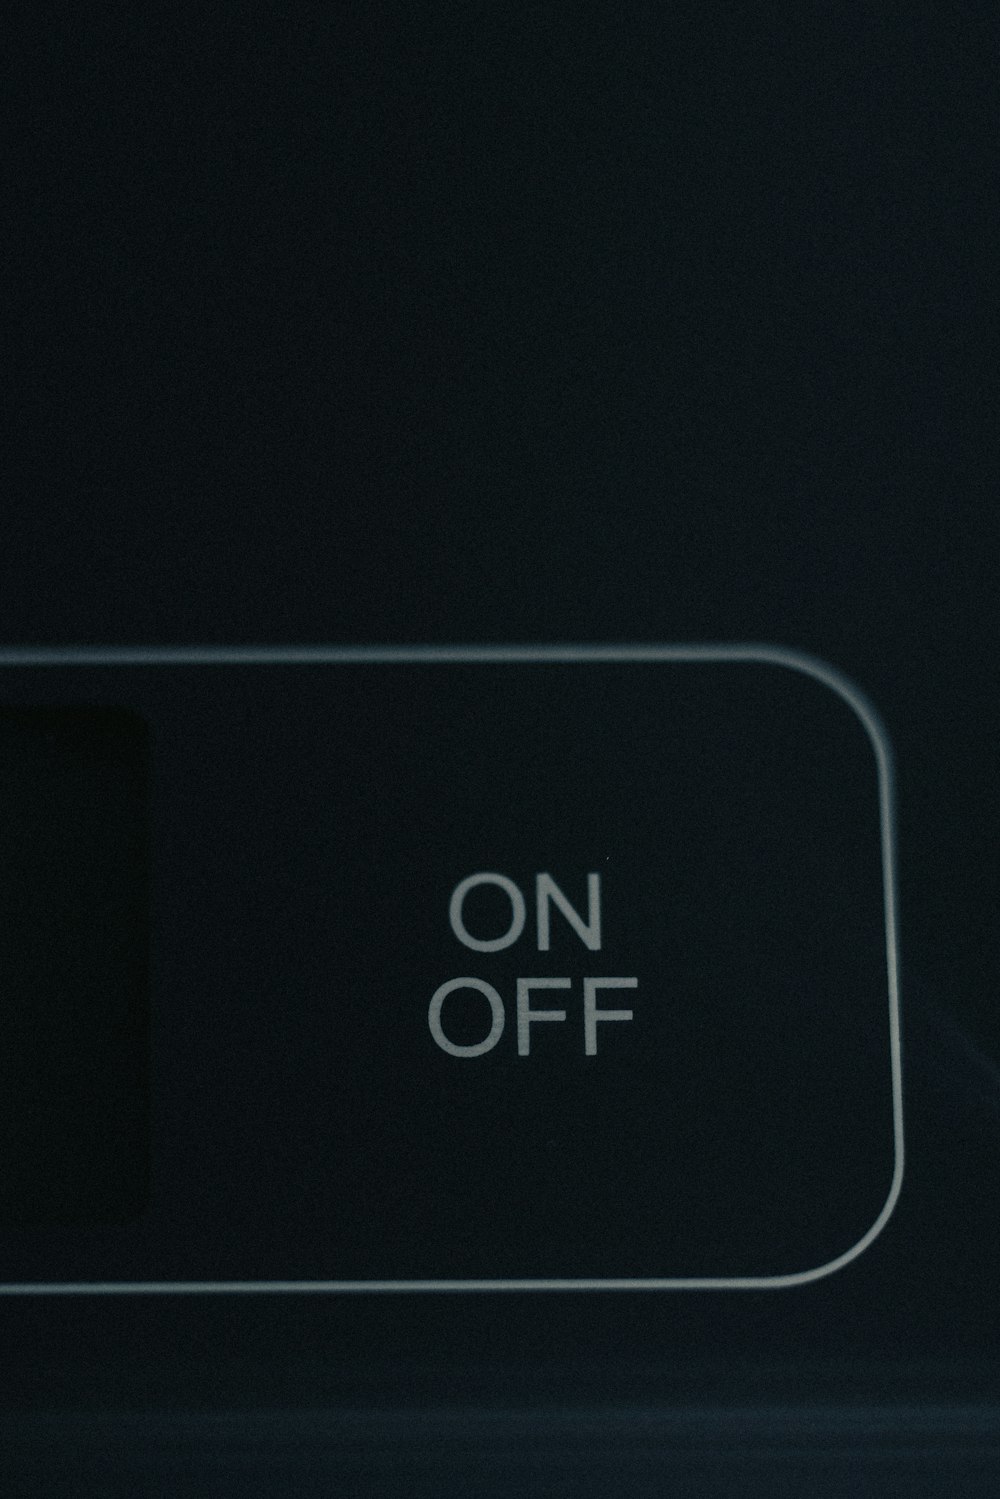 an on off button on a black wall